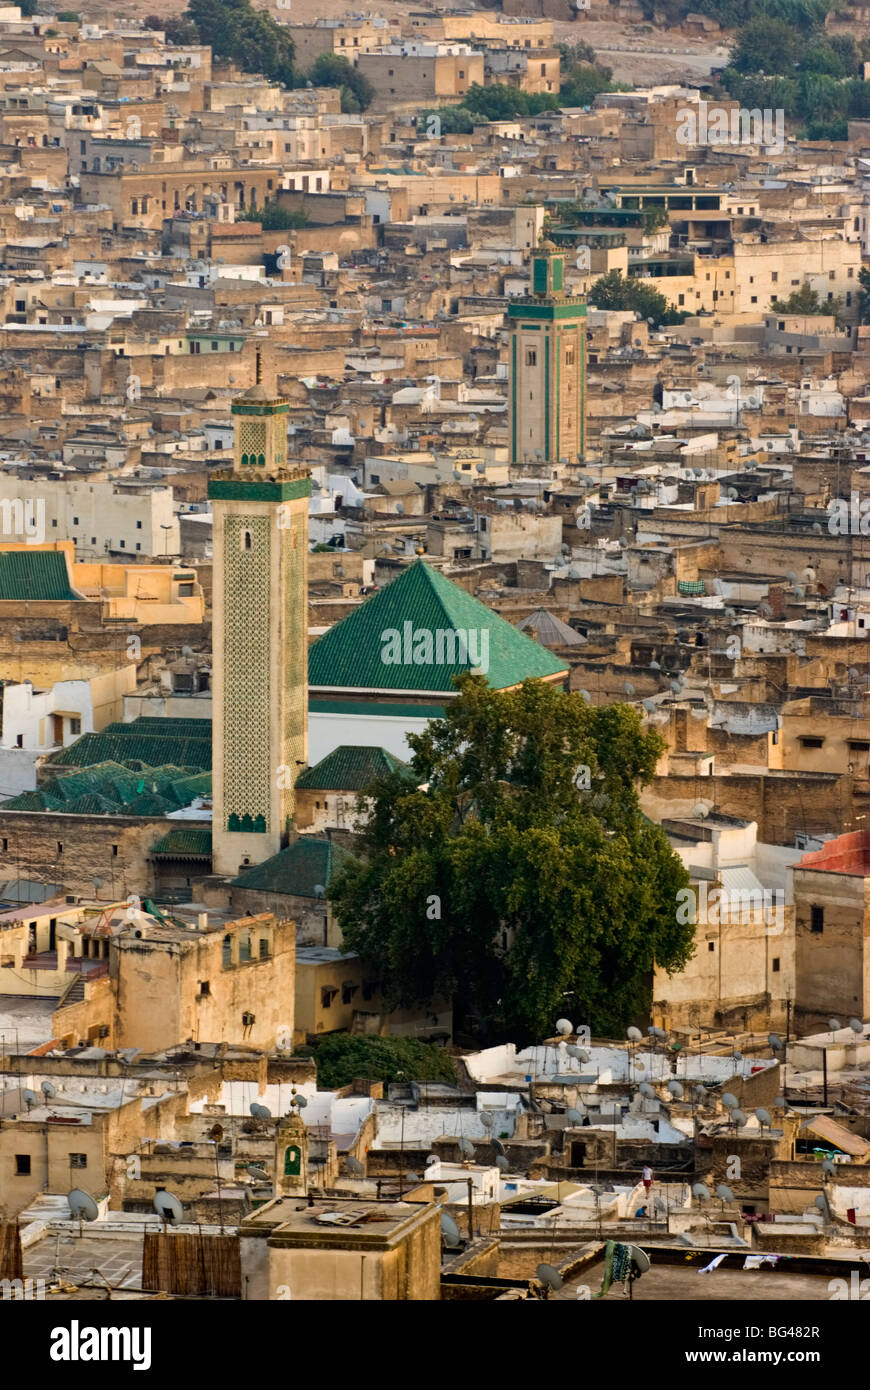 View of city from the hills surrounding, Fez, Morocco, North Africa, Africa Stock Photo